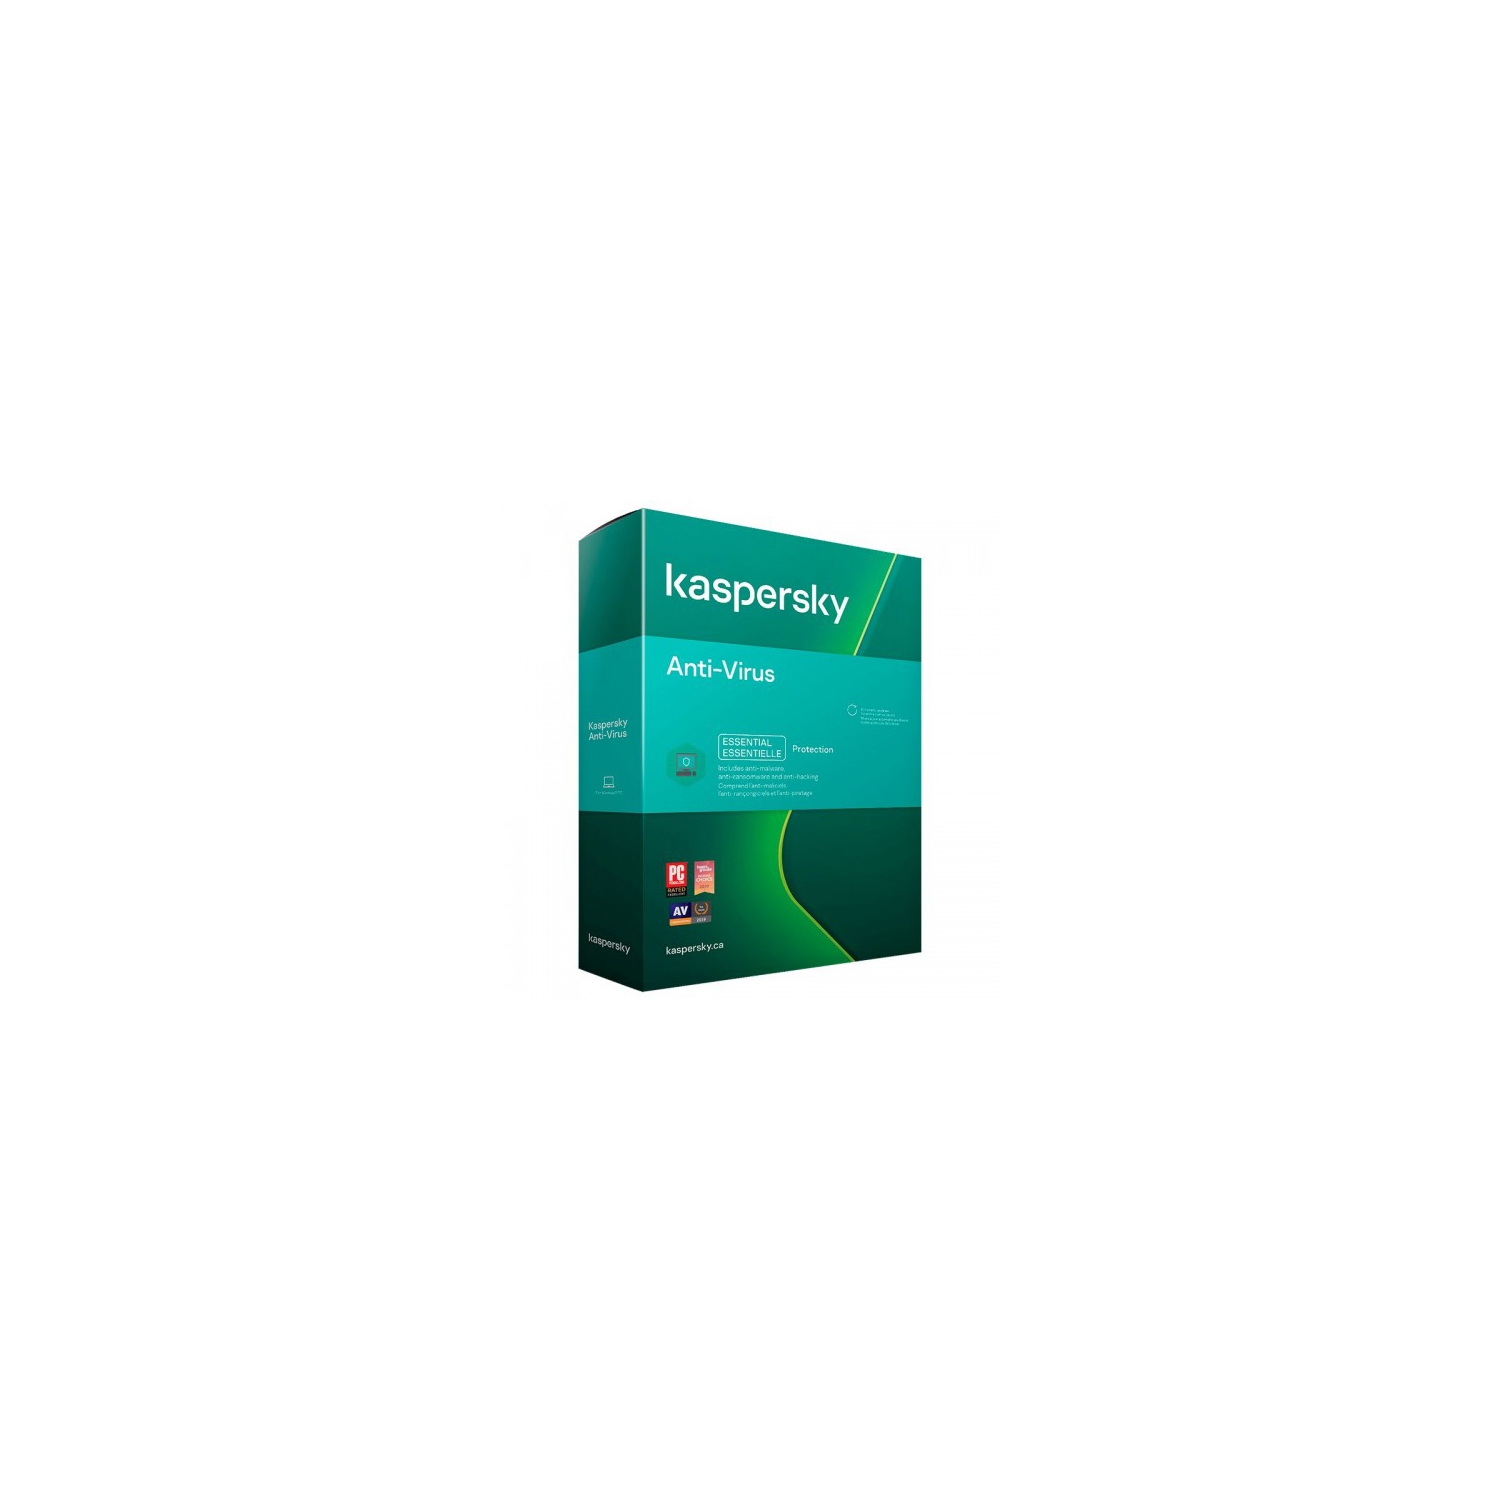 Kaspersky Anti-Virus 3-User - 1 Year(KEY CARD ONLY)(FREE SHIPPING)